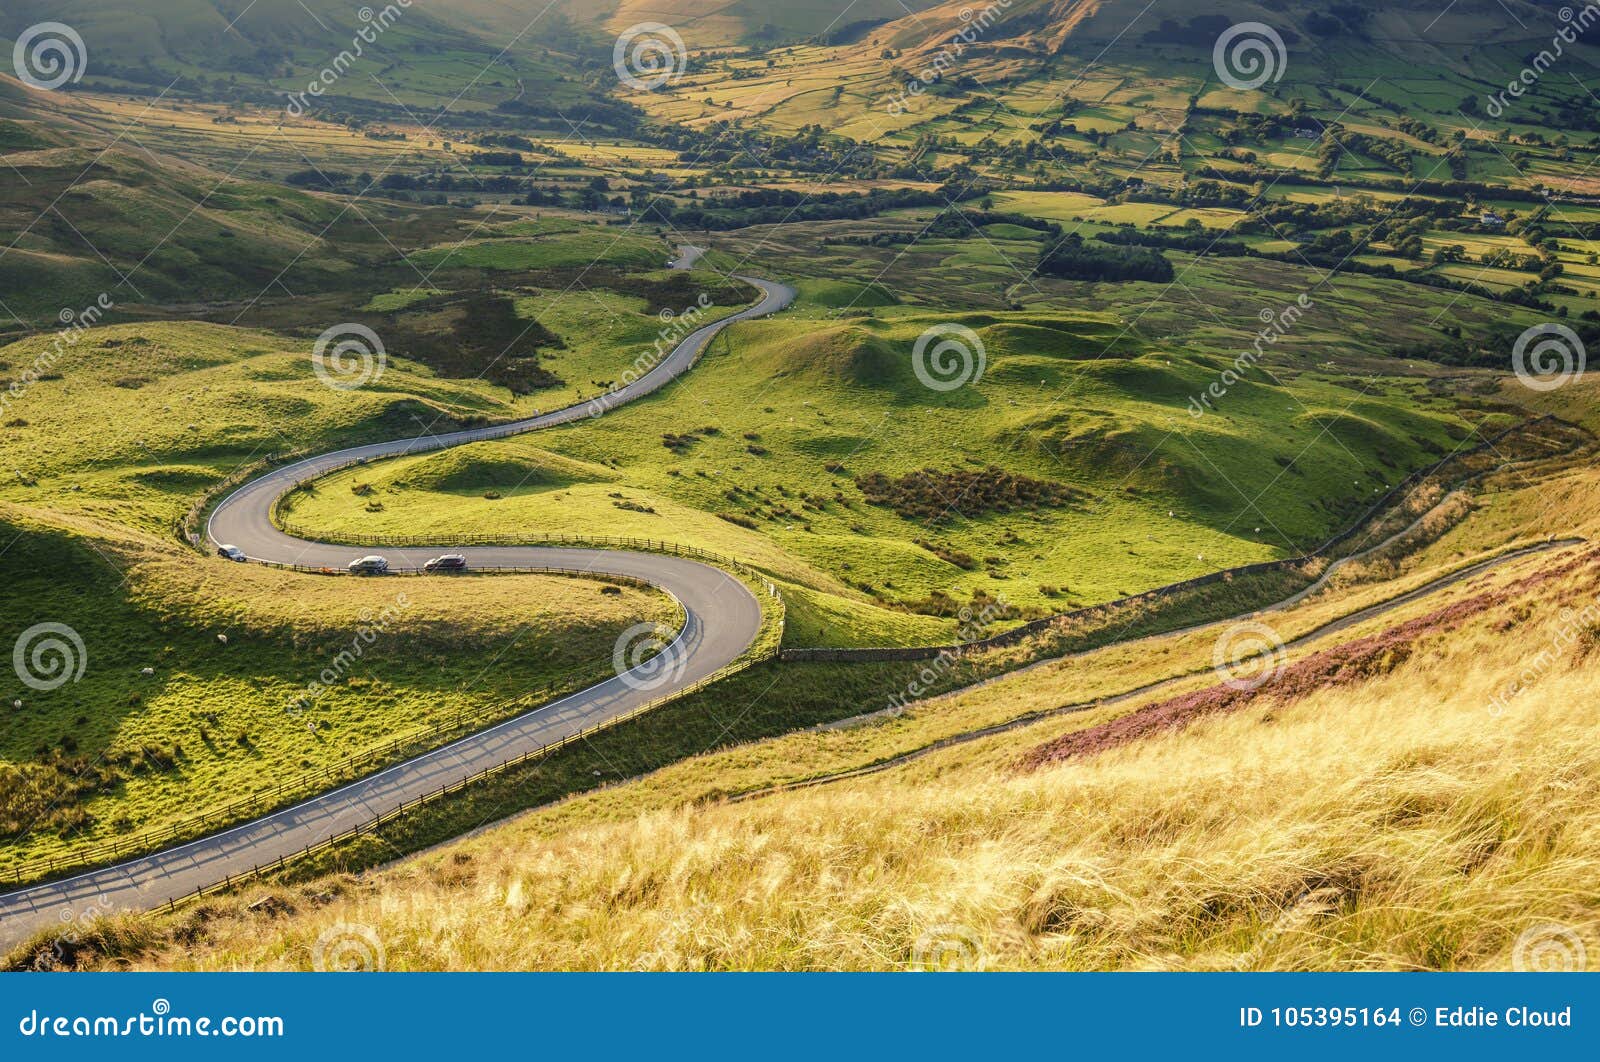 edale valley road in warm sunset light at summer